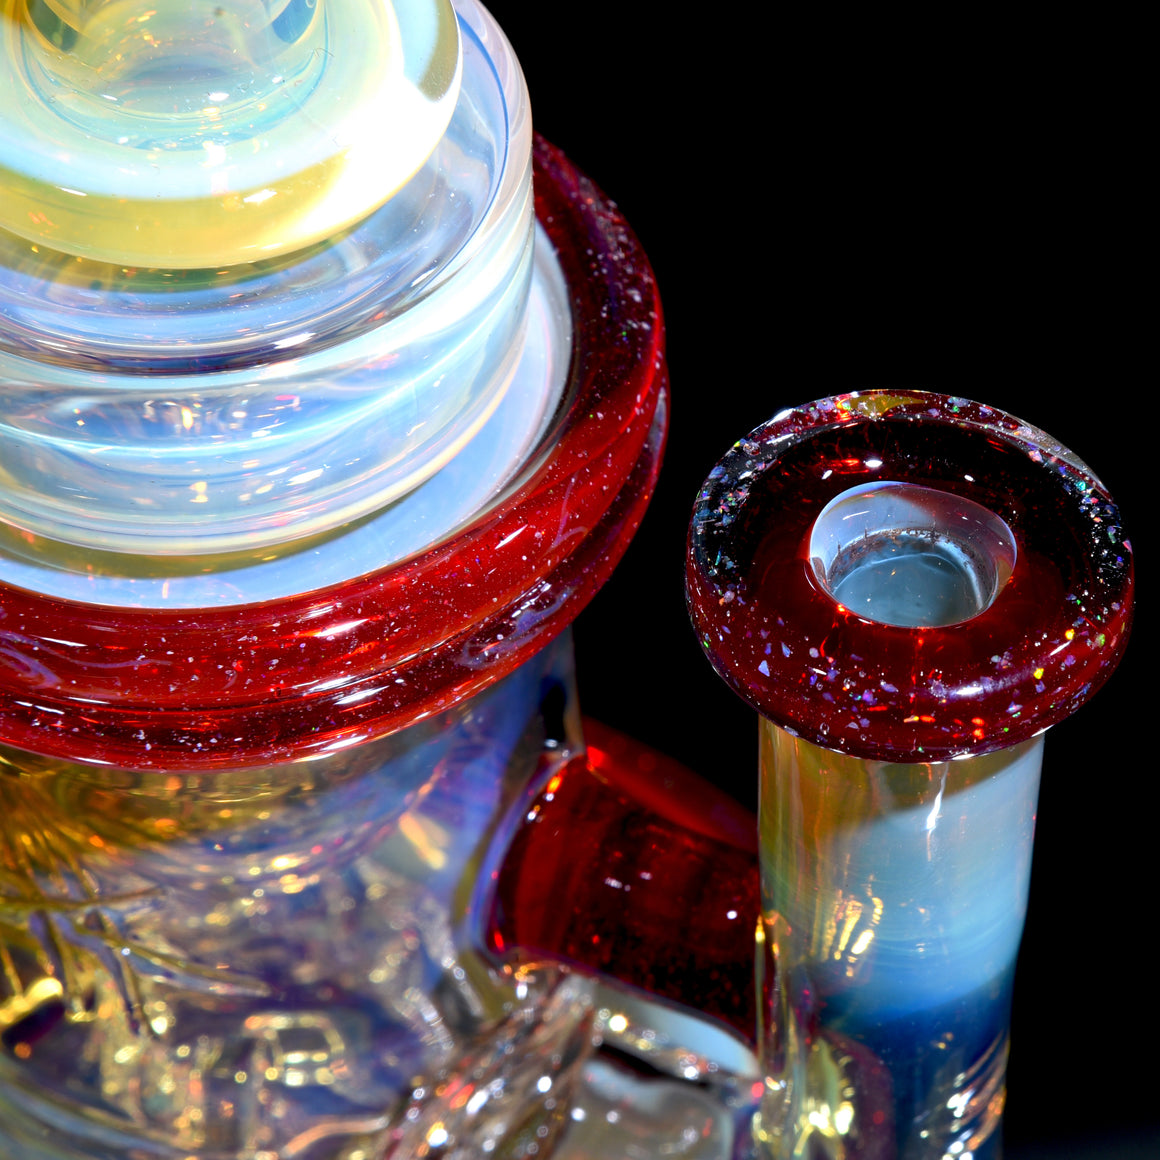 Fully-worked Klein Recycler - Crushed Opal over Pomegranate - 10mm Female